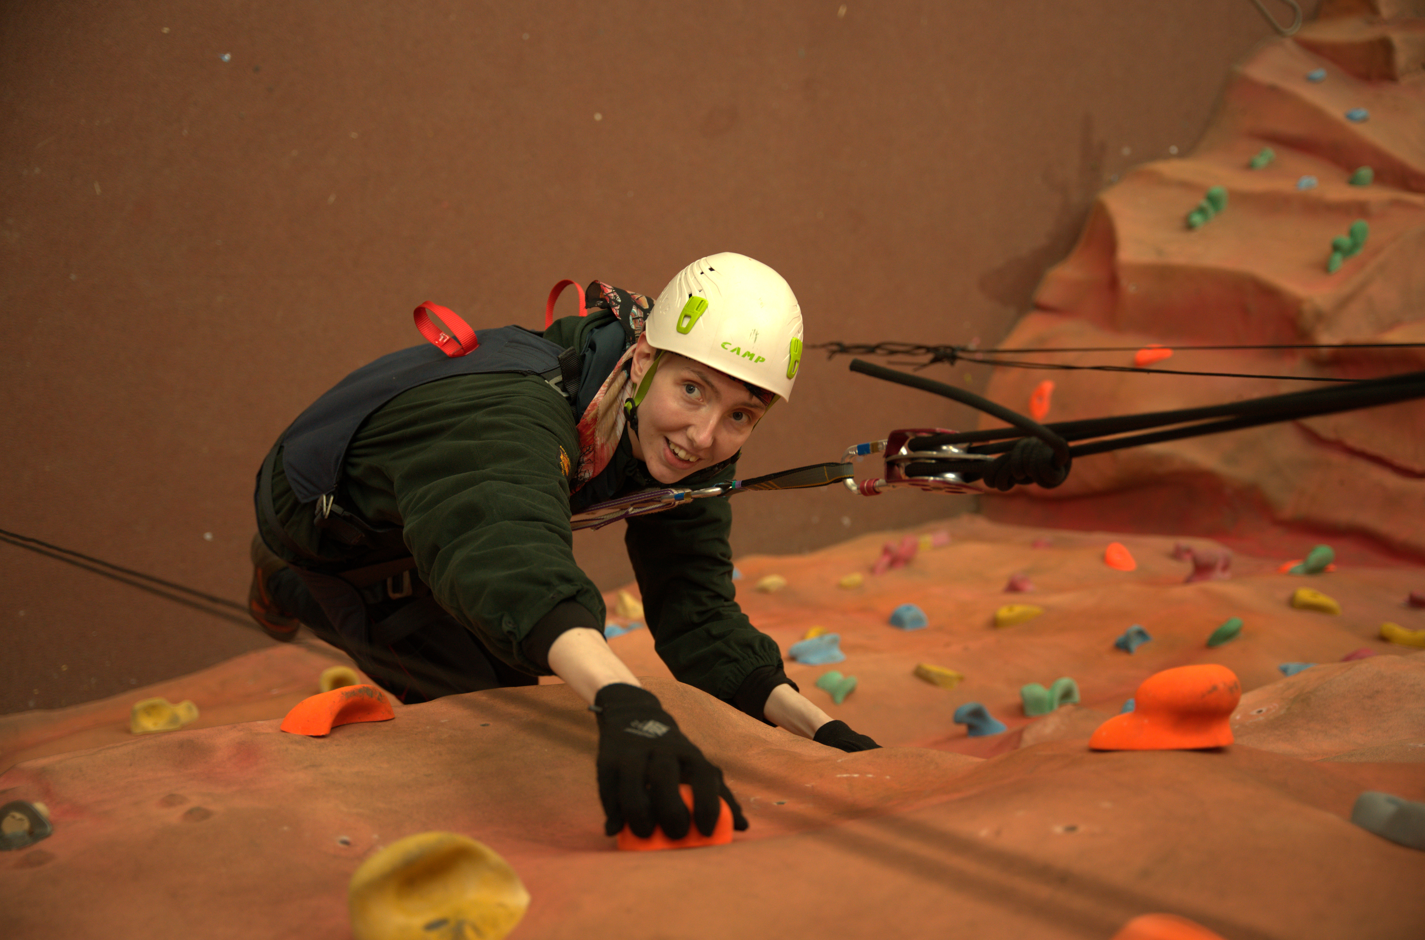 A lady in a harness and safety rope system climbing up a wall and smiling at the camera